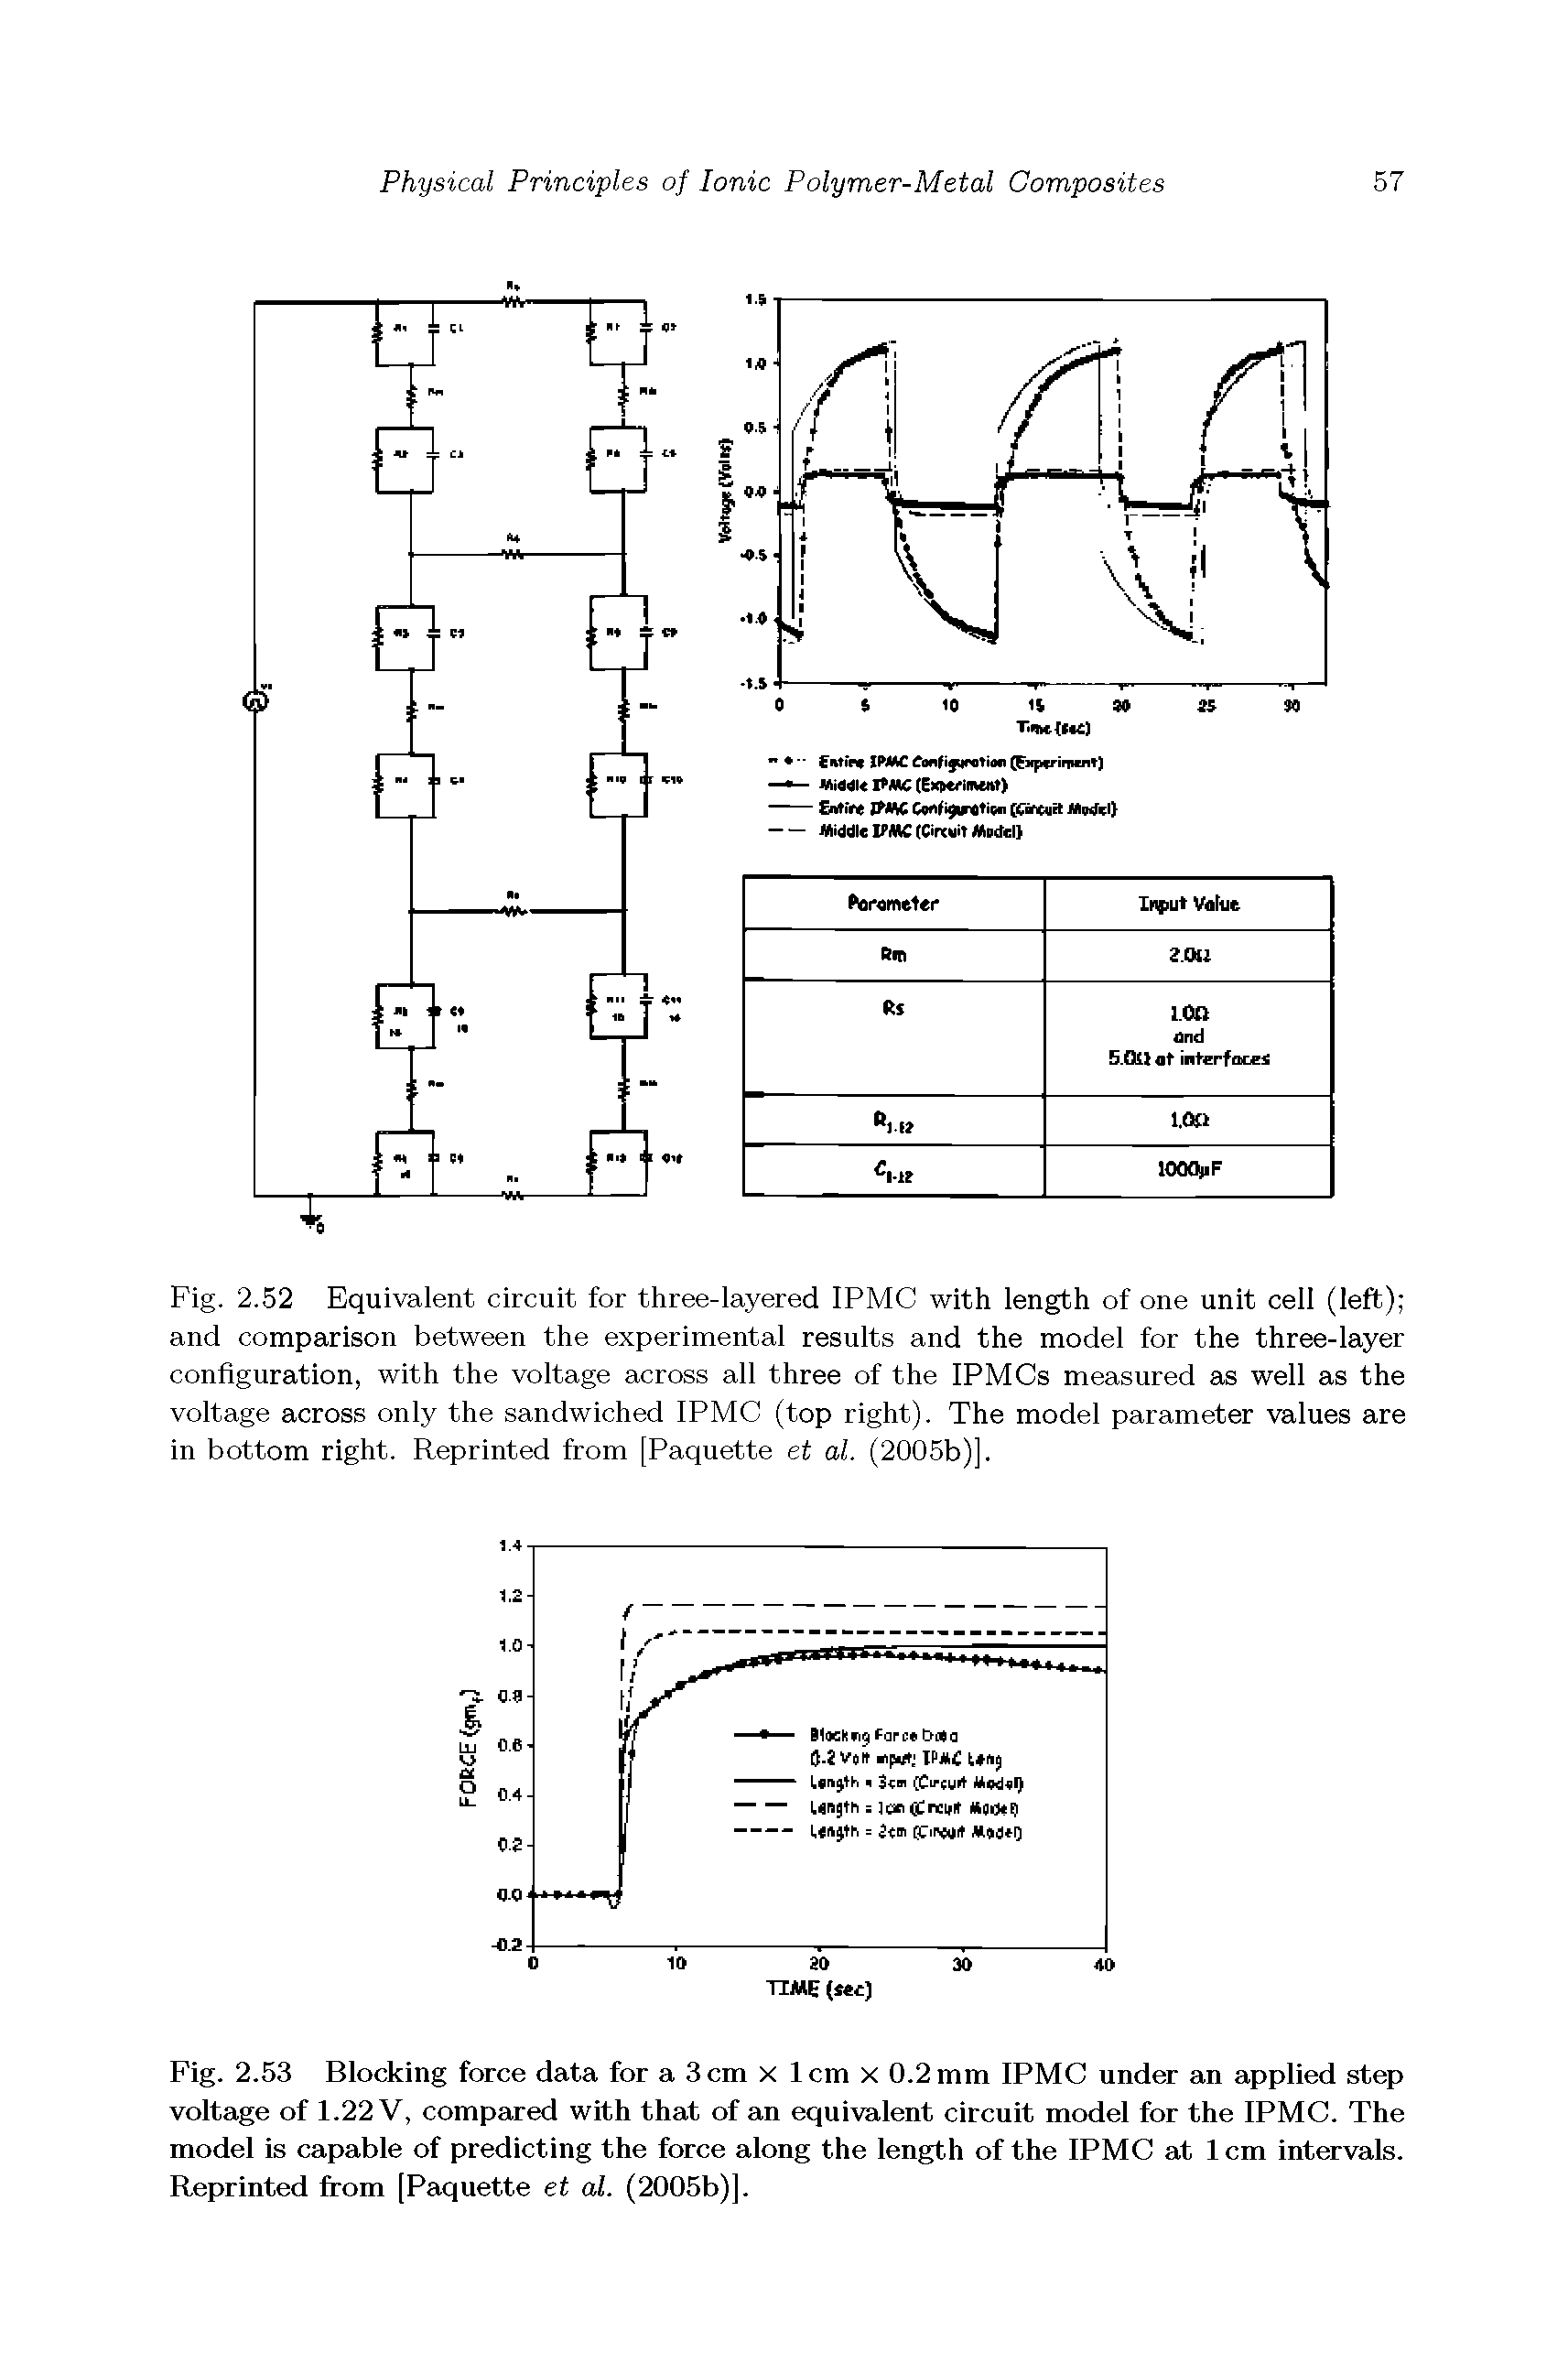 Fig. 2.53 Blocking force data for a 3 cm x 1 cm x 0.2 mm IPMC under an applied step voltage of 1.22 V, compared with that of an equivalent circuit model for the IPMC. The model is capable of predicting the force along the length of the IPMC at 1cm intervals. Reprinted from [Paquette et al. (2005b)].